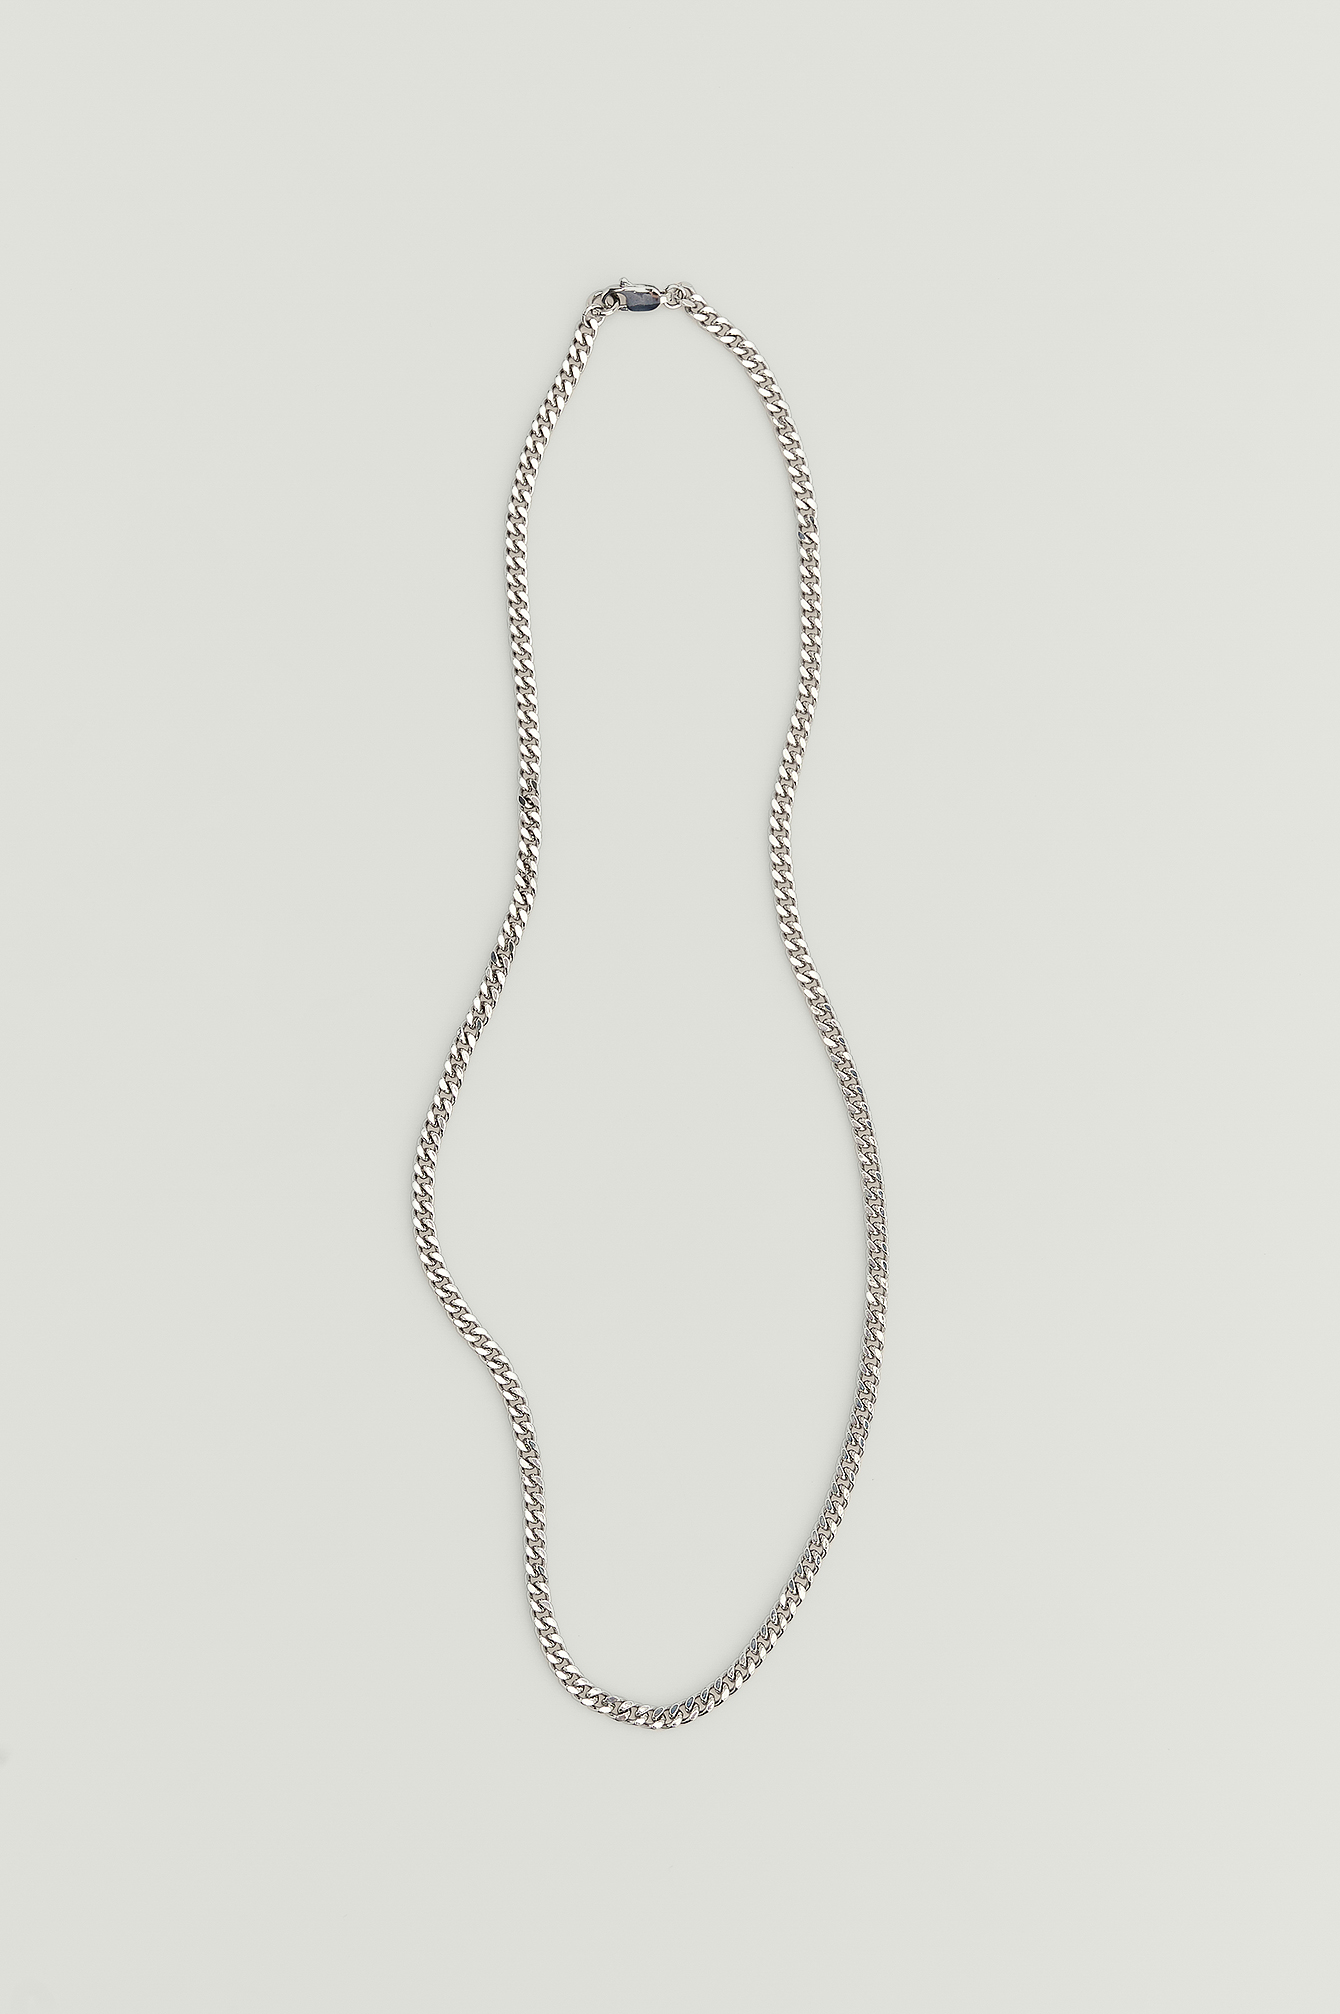 NA-KD Accessories Silver Plated Chain Necklace - Silver